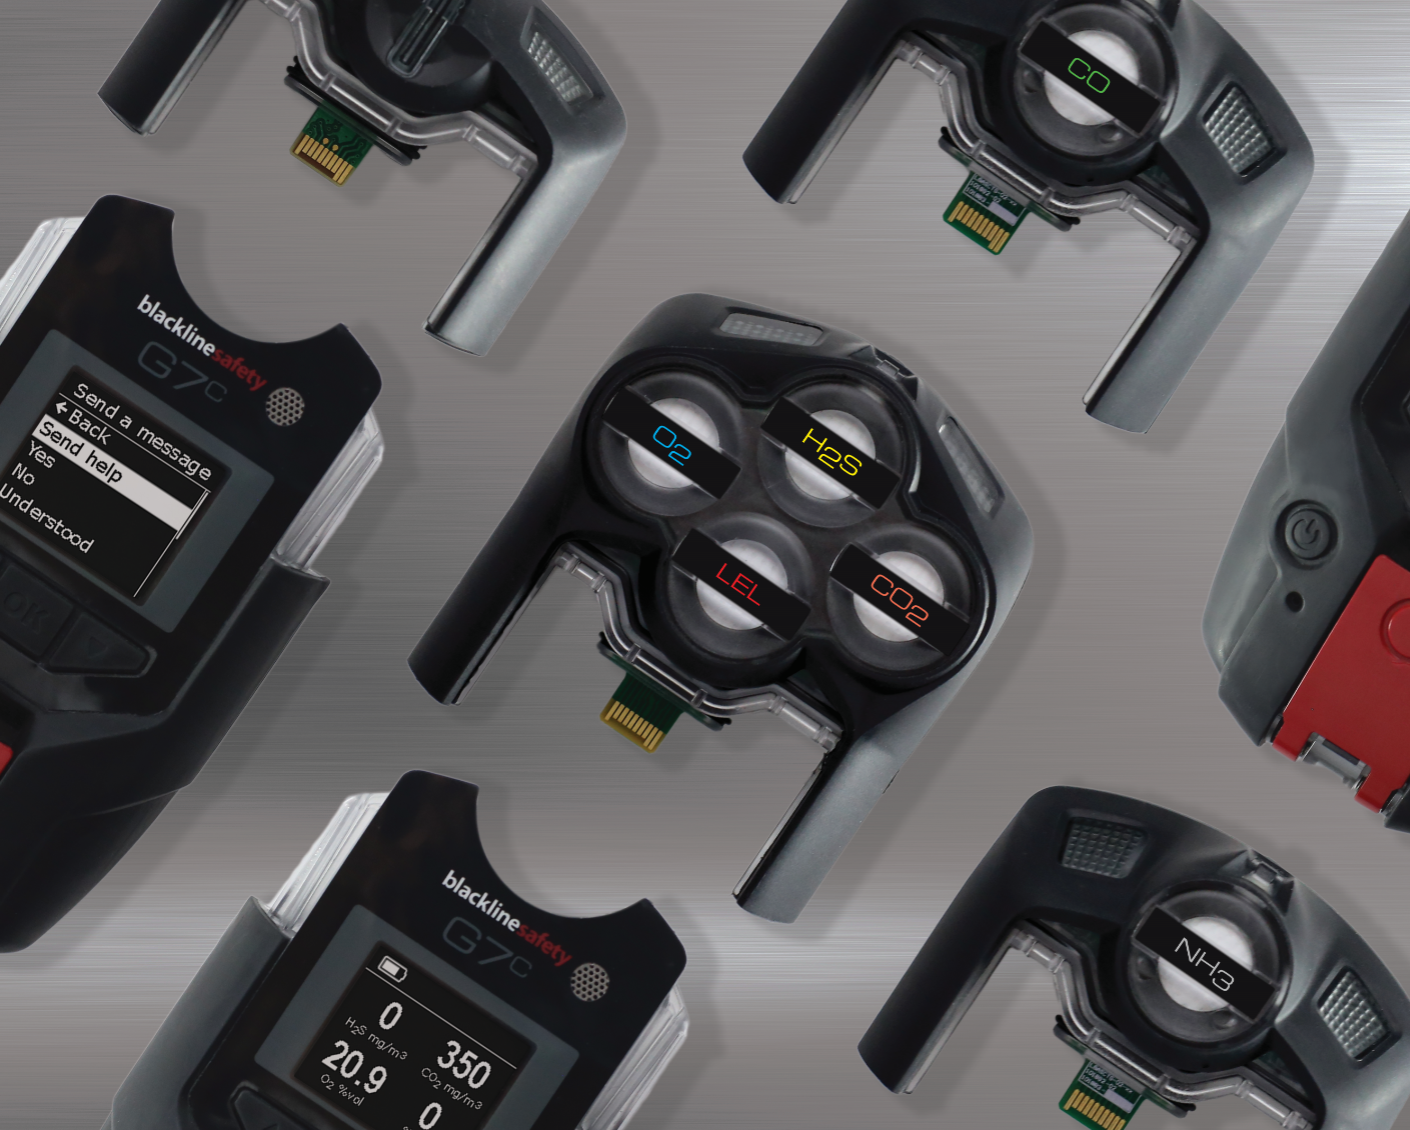 Blackline Safety Increases Worker Safety with Real-Time Monitoring and Gas Detection